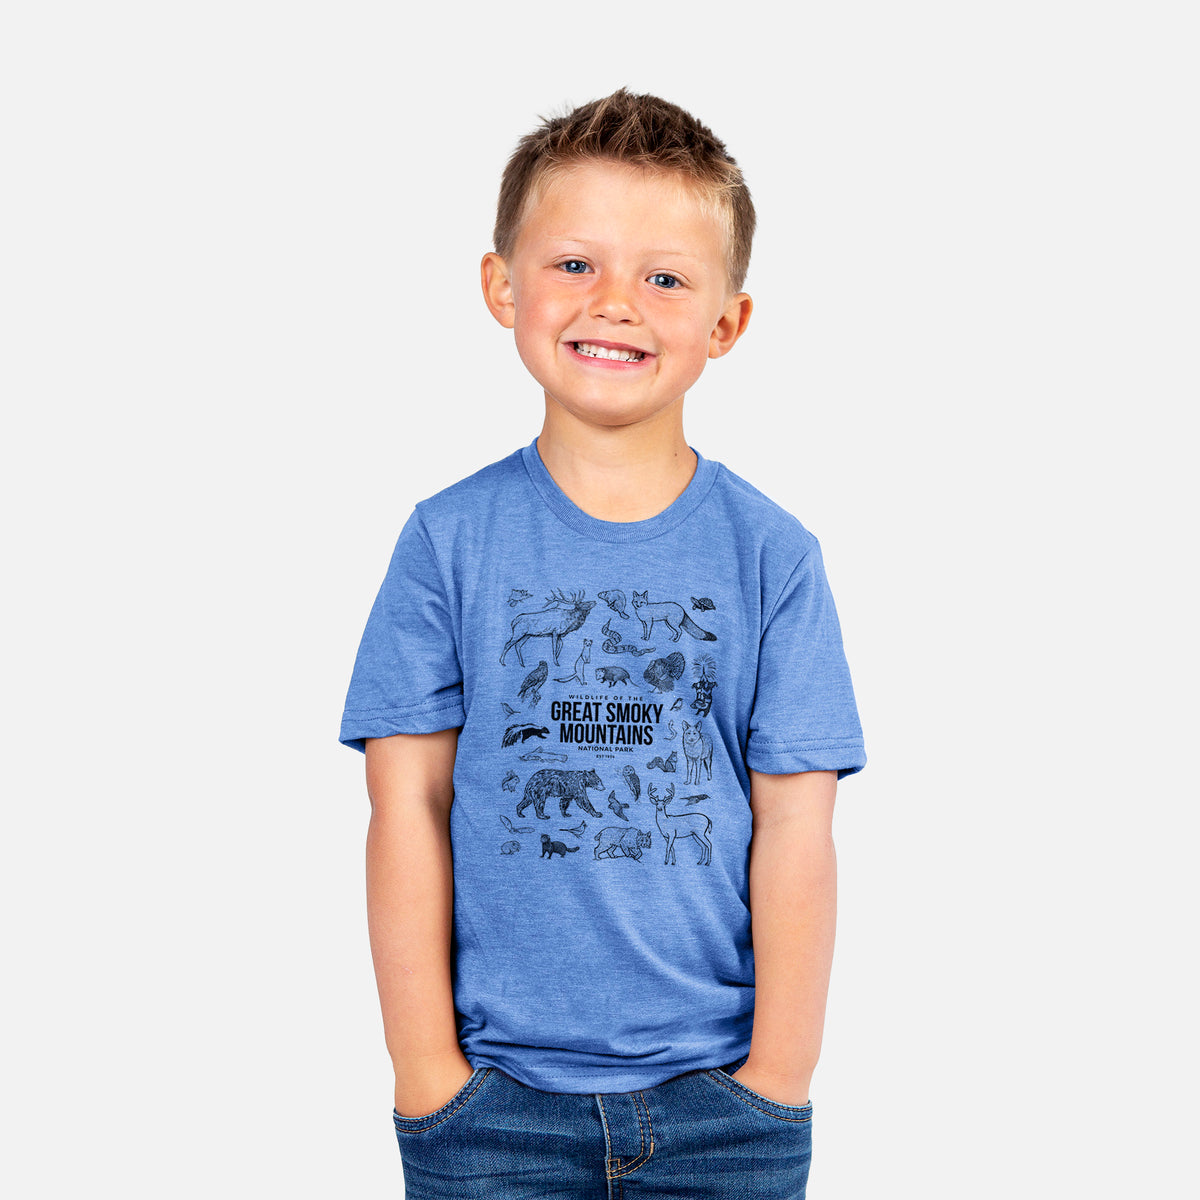 Wildlife of the Great Smoky Mountains National Park - Kids Shirt